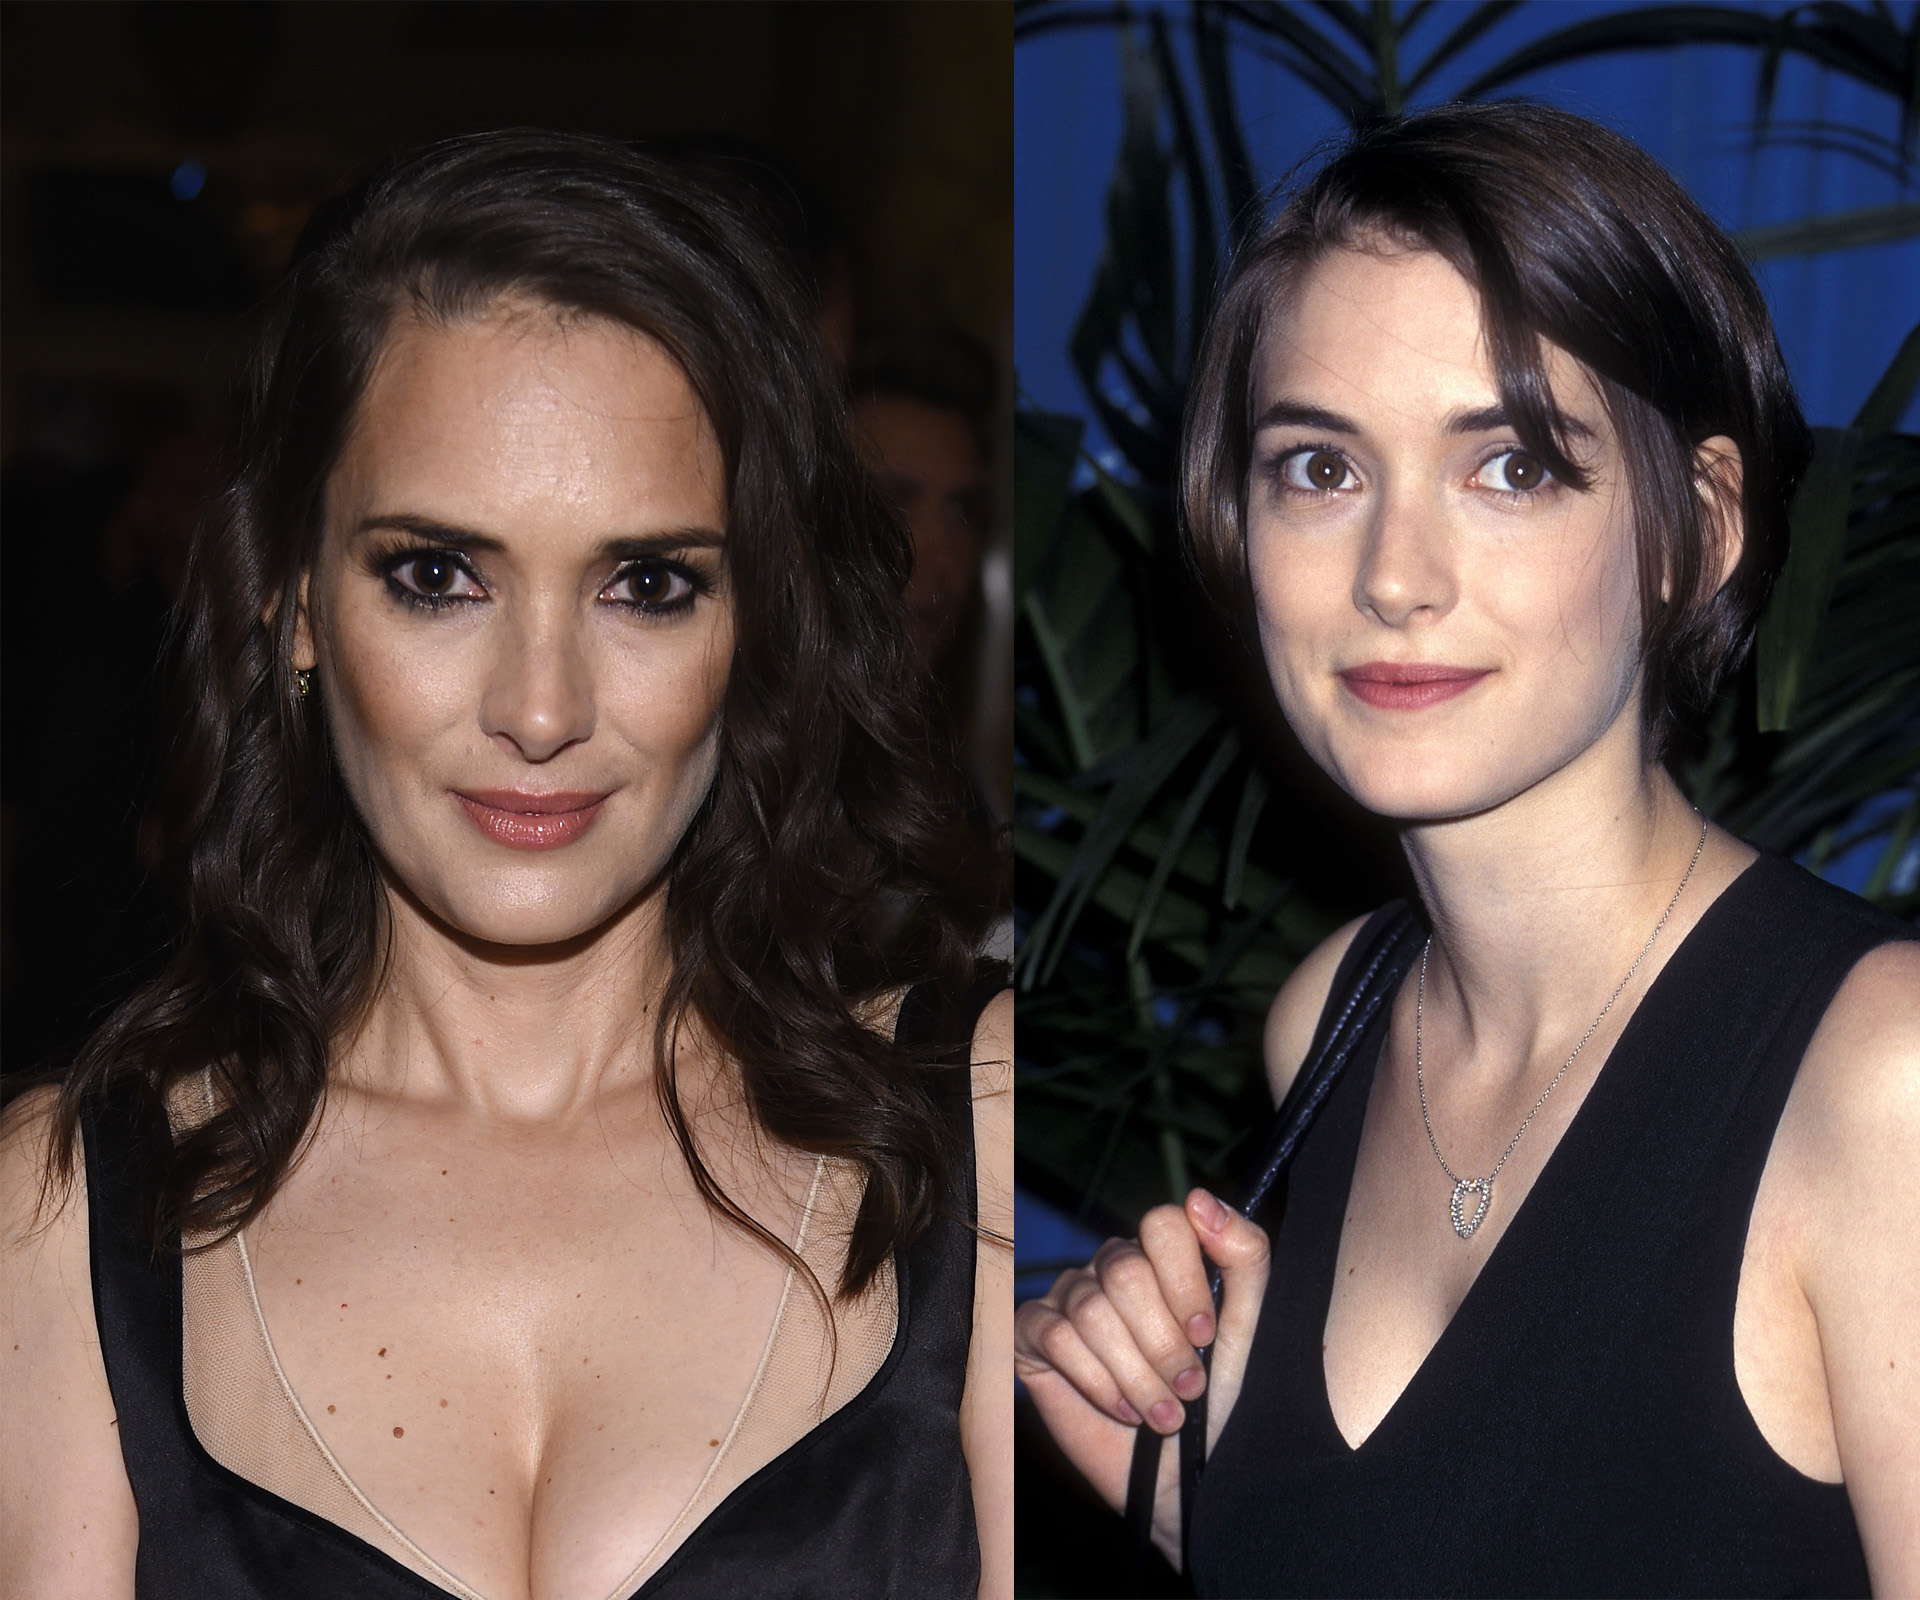 Winona Ryder hasn’t aged in 20 years